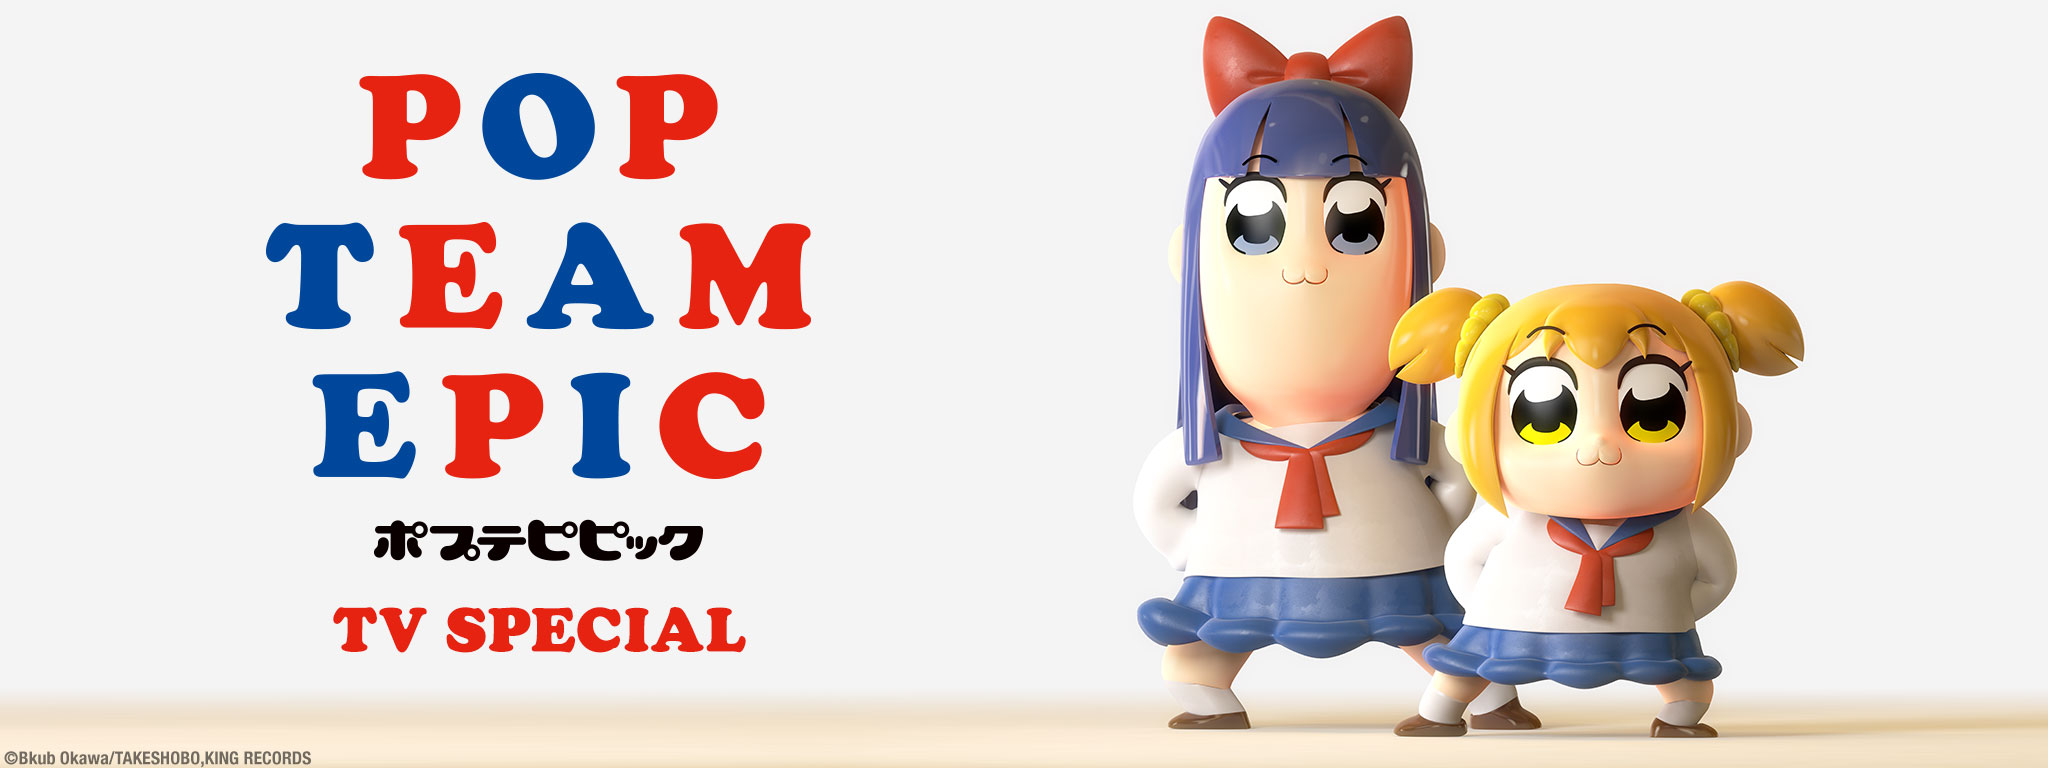 Title Art for Pop Team Epic TV Special